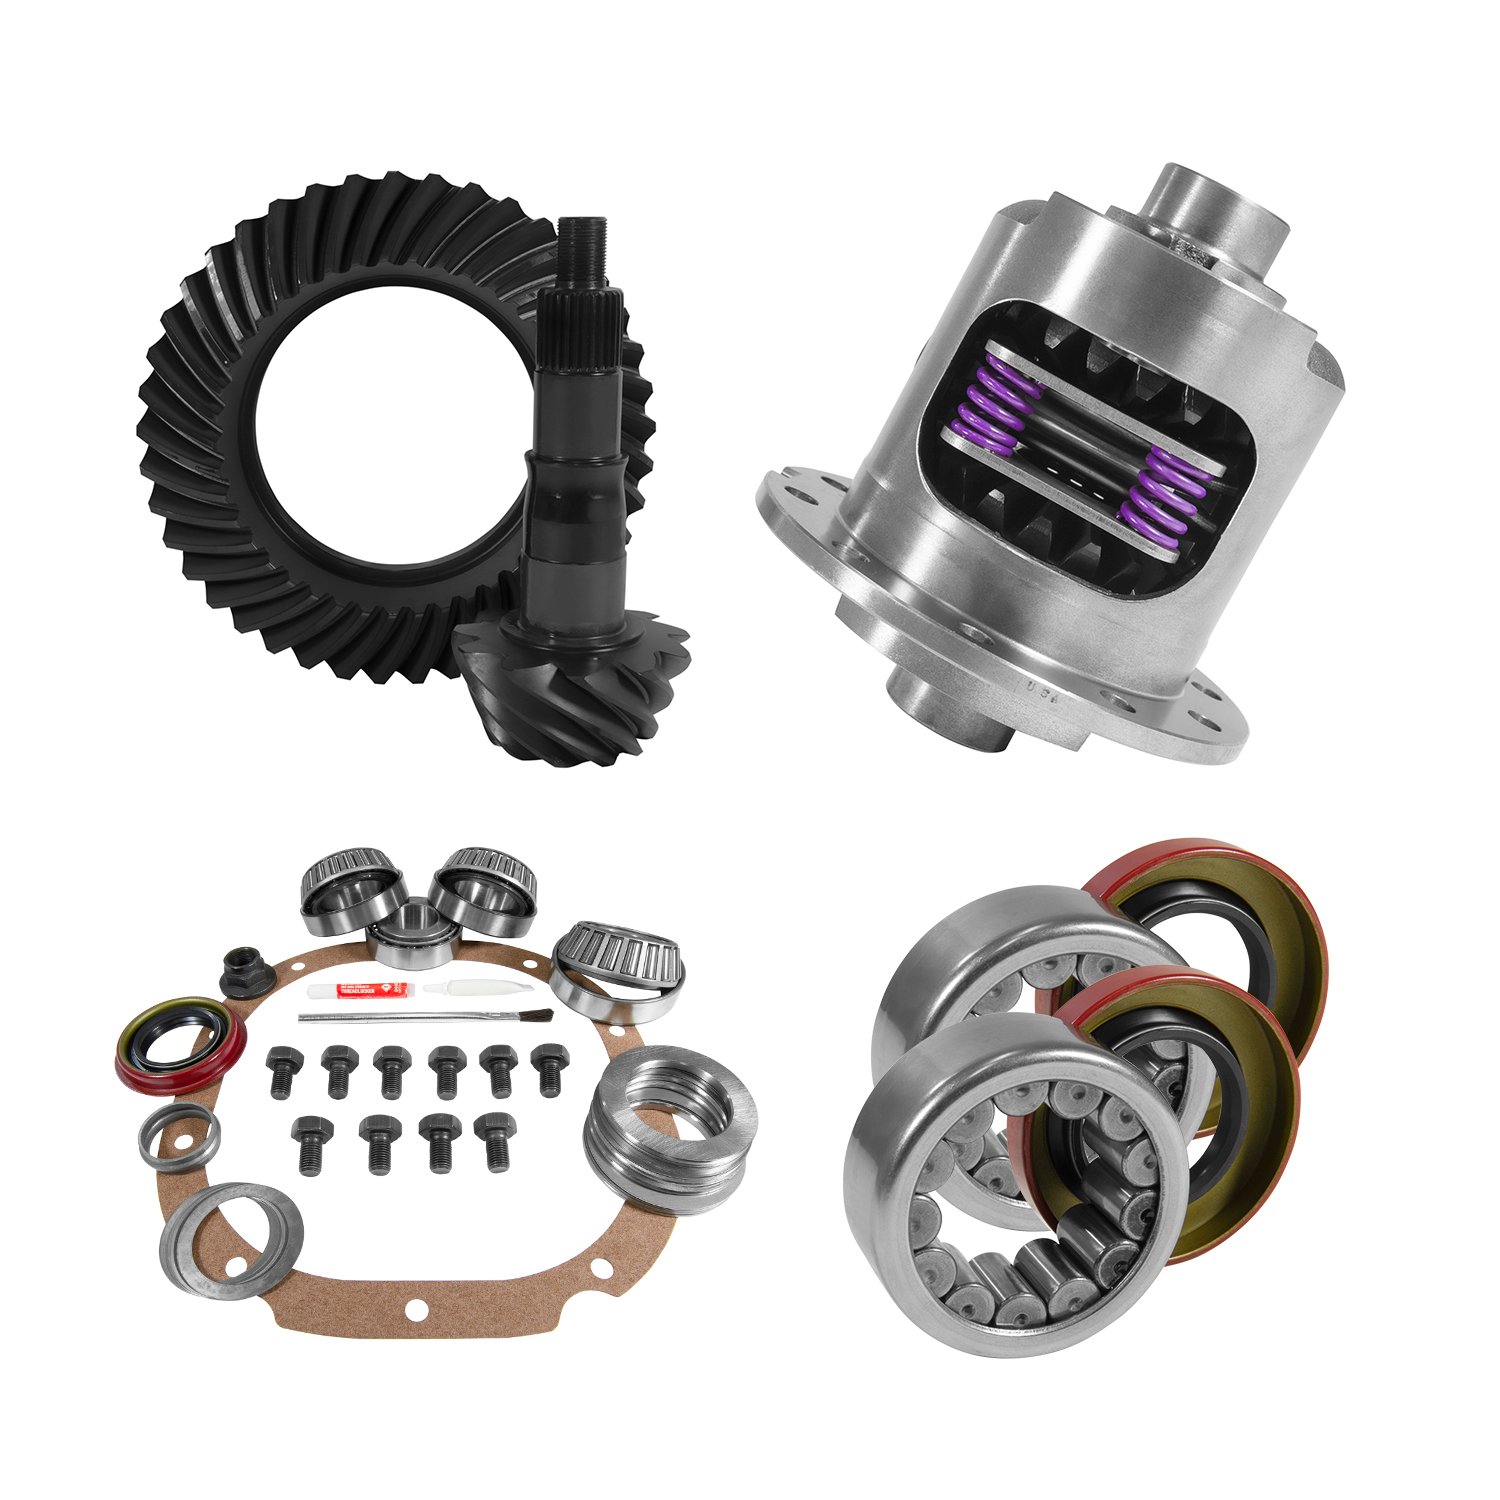 USA Standard 10771 8.8 in. Ford 3.55 Rear Ring & Pinion Install Kit, 31Spl Posi, 2.99 in. Axle Bearings